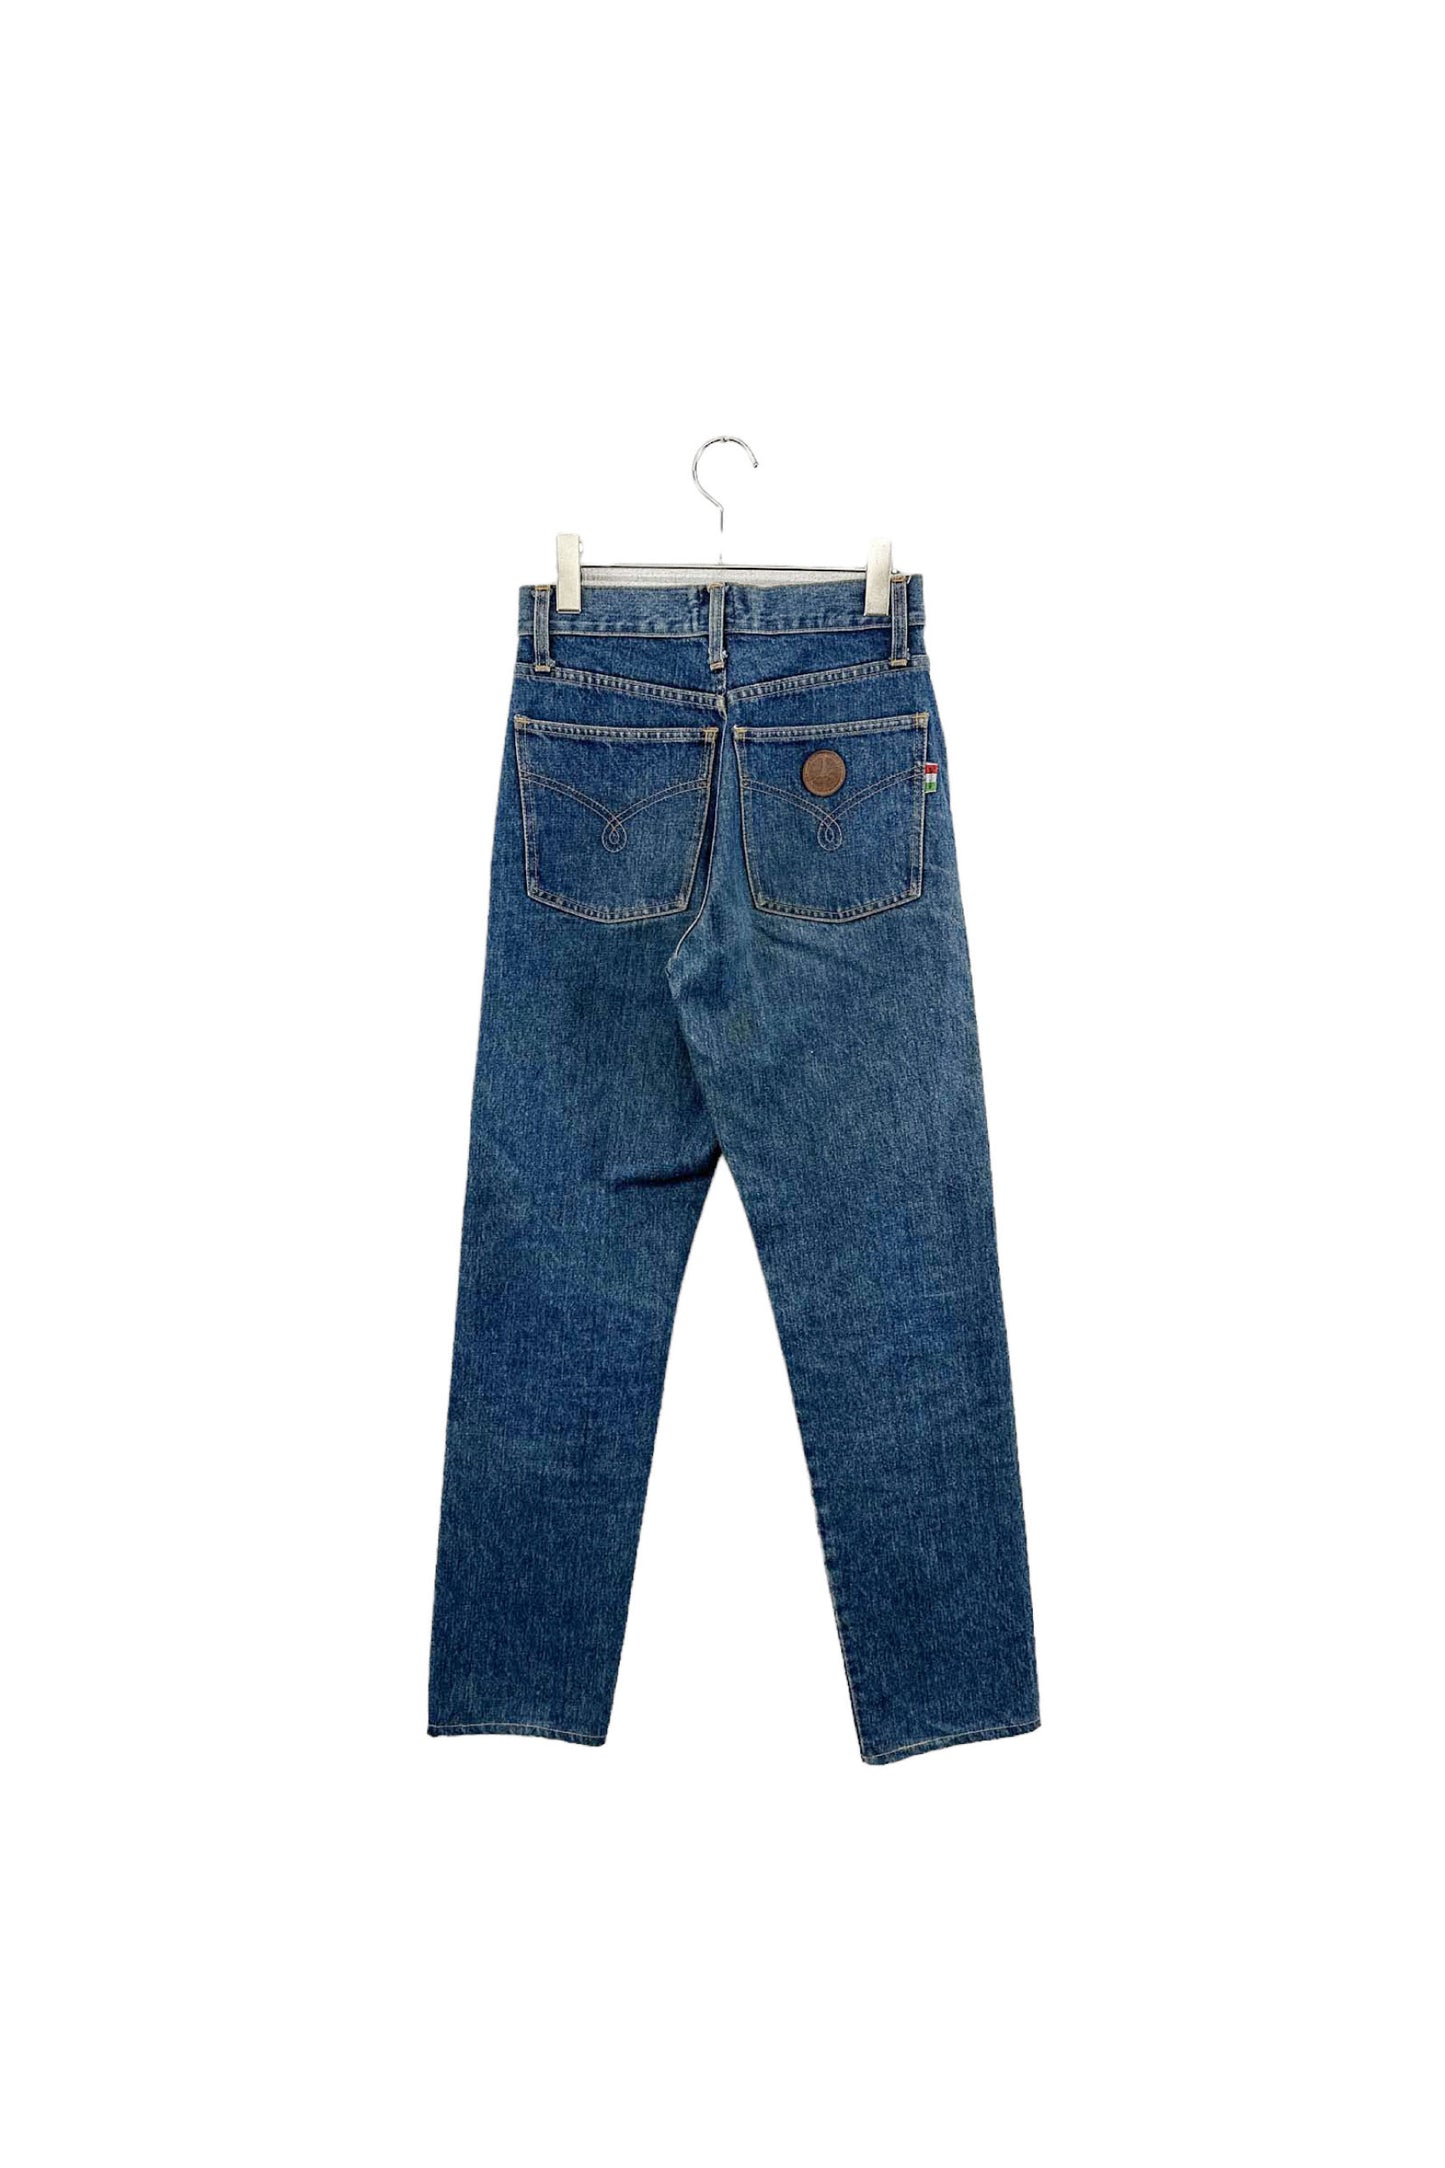 Made in ITALY MOSCHINO JEANS denim pants